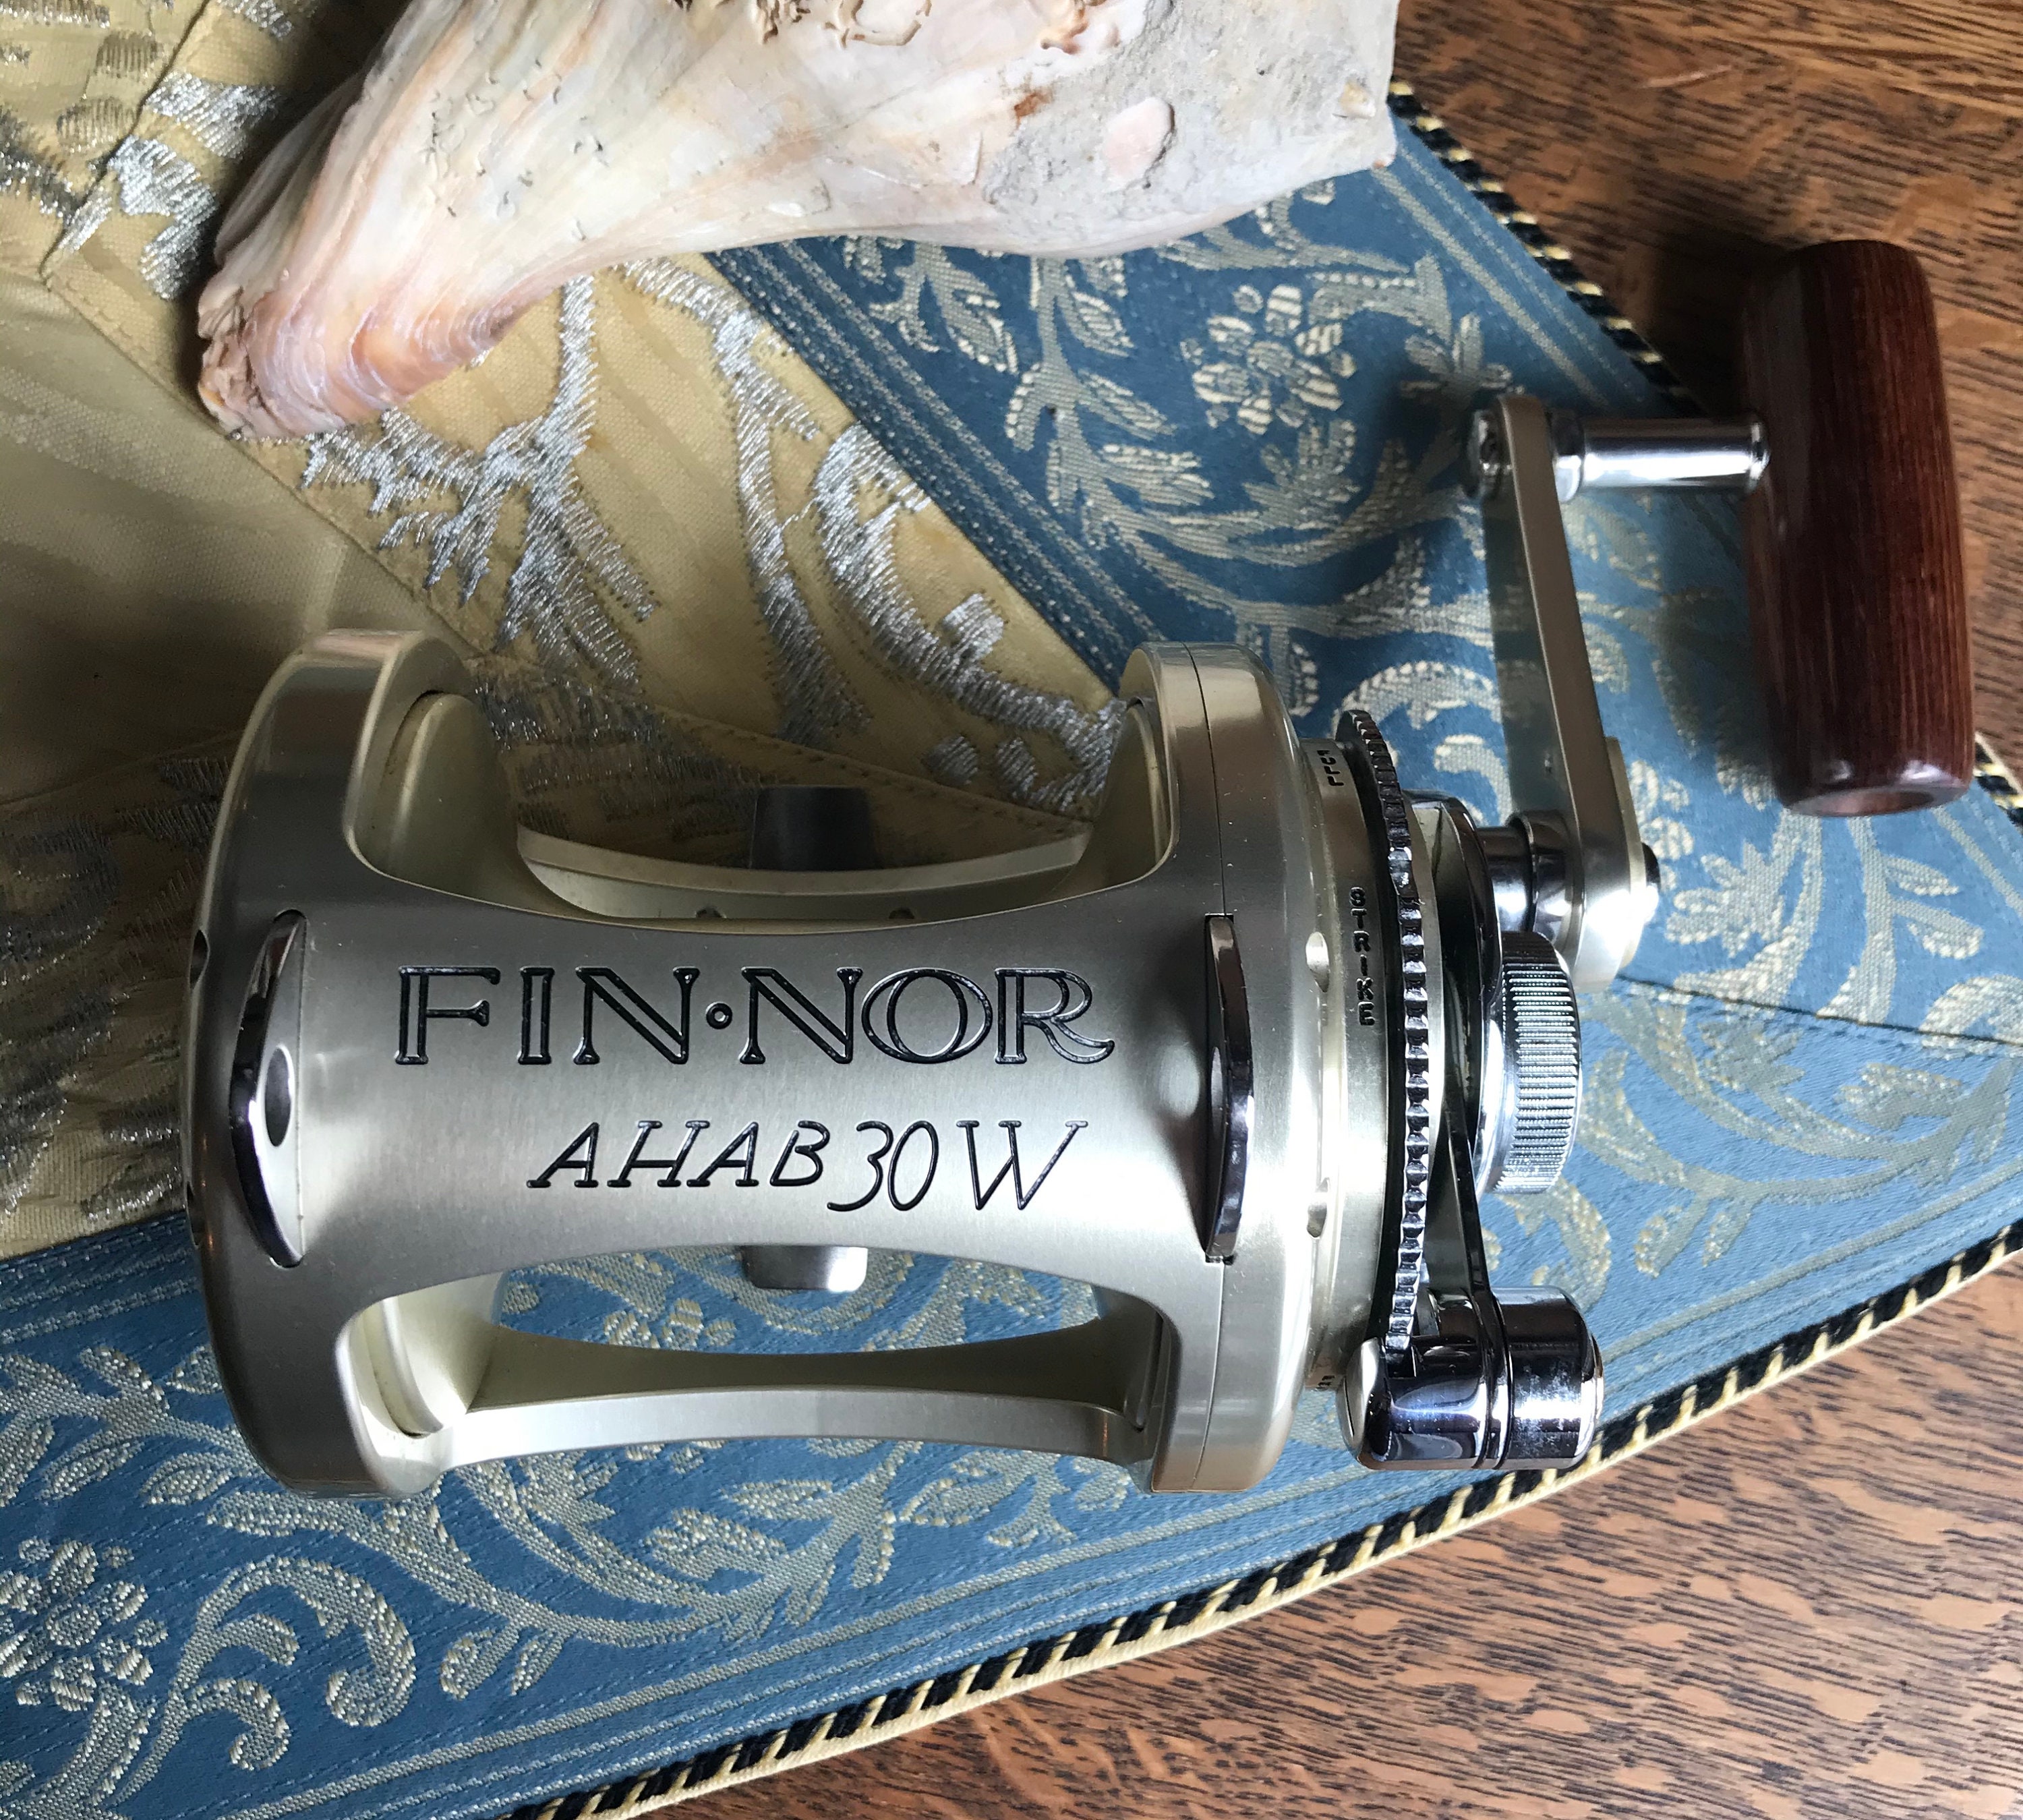 Fin nor Ahab 30W Trolling Reel Gold New in Box/ Papers Unused Big